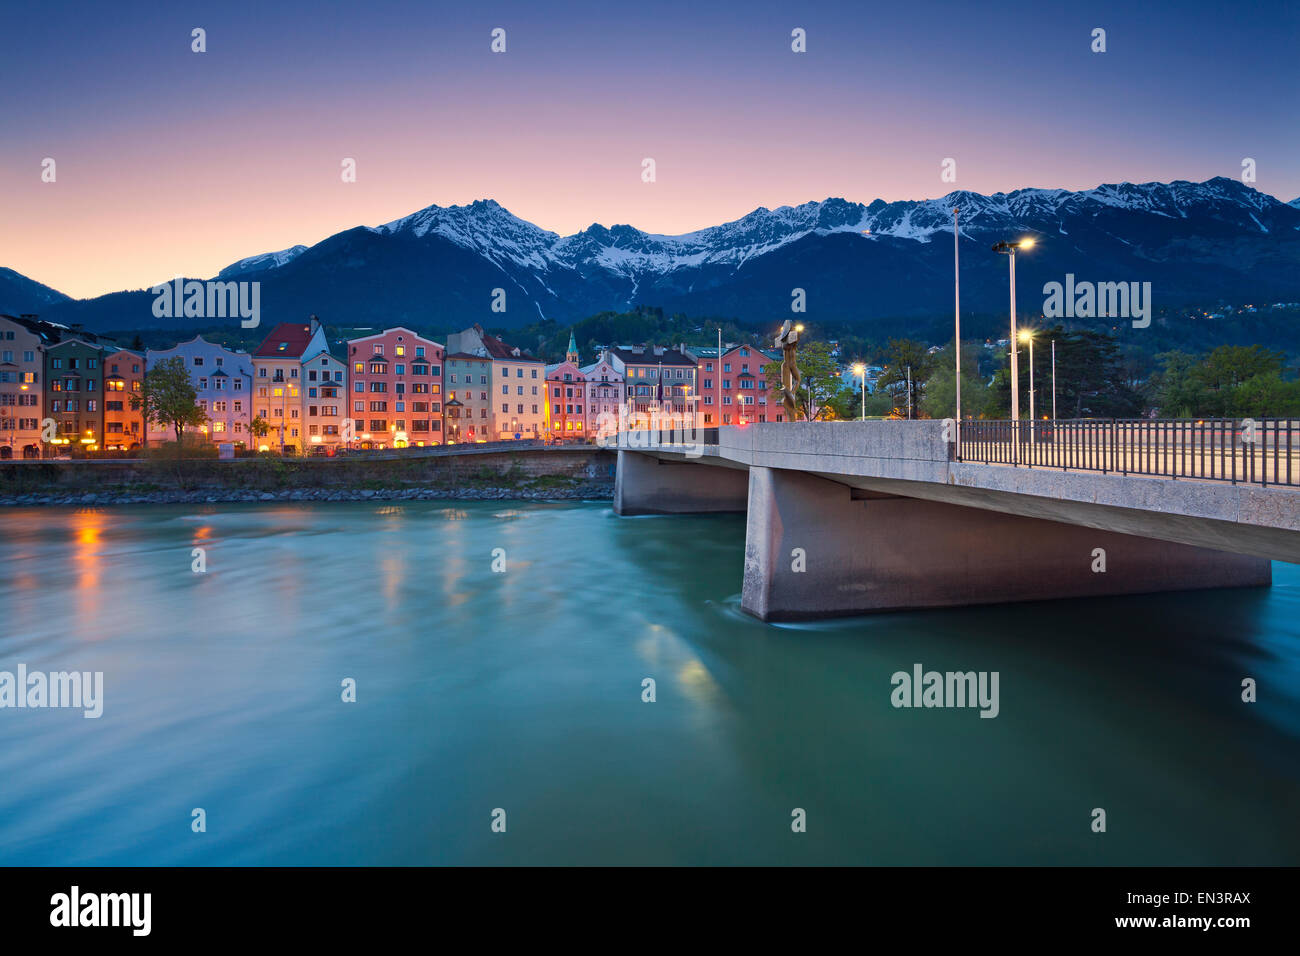 Innsbruck. Image of Innsbruck, Austria during twilight blue hour with European Alps in the background. Stock Photo